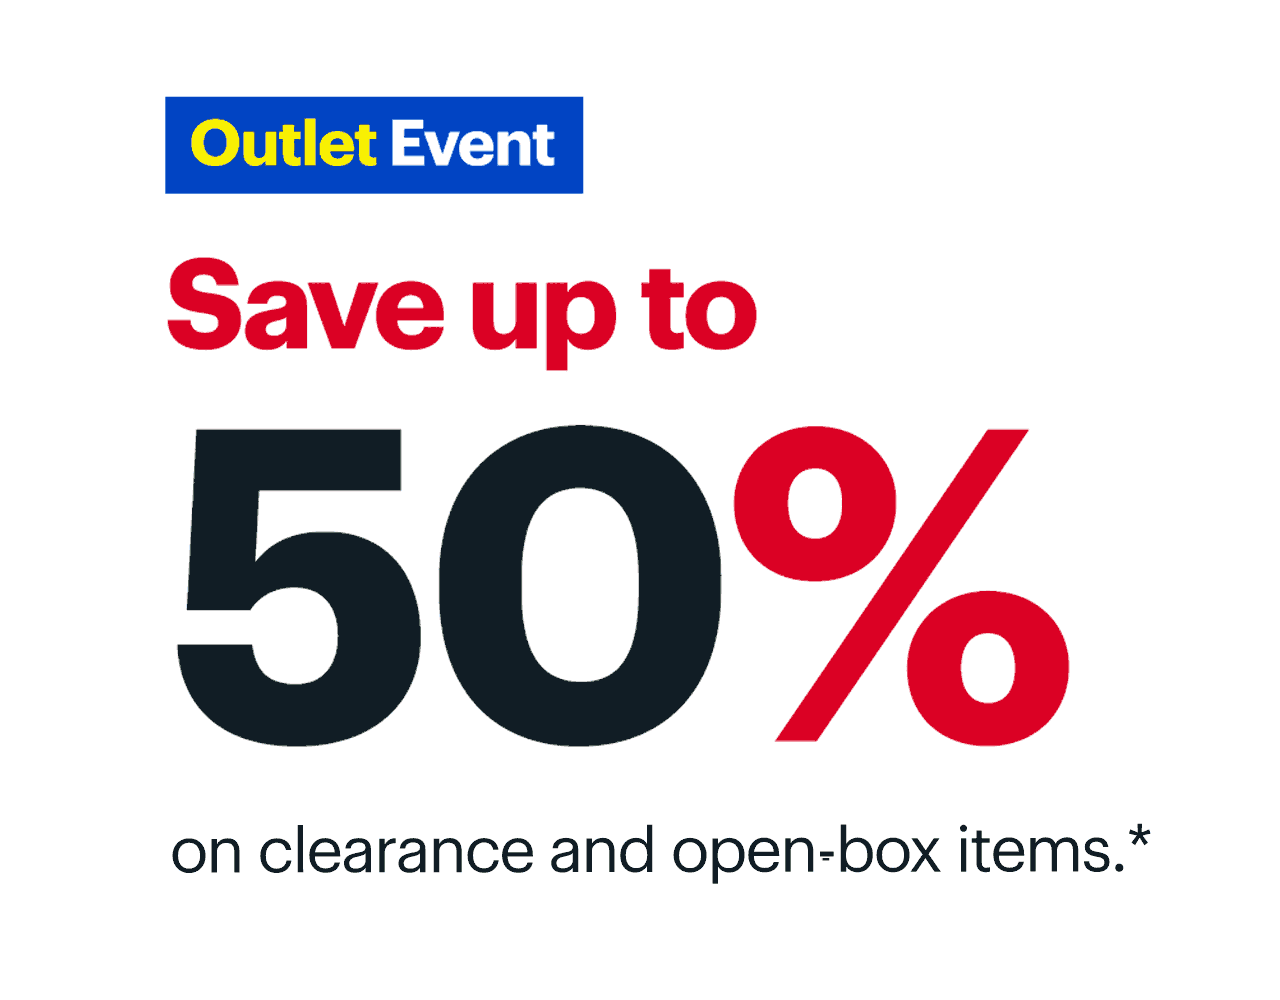 Outlet Event. Save up to 50% on clearance and open-box items. Reference disclaimer.